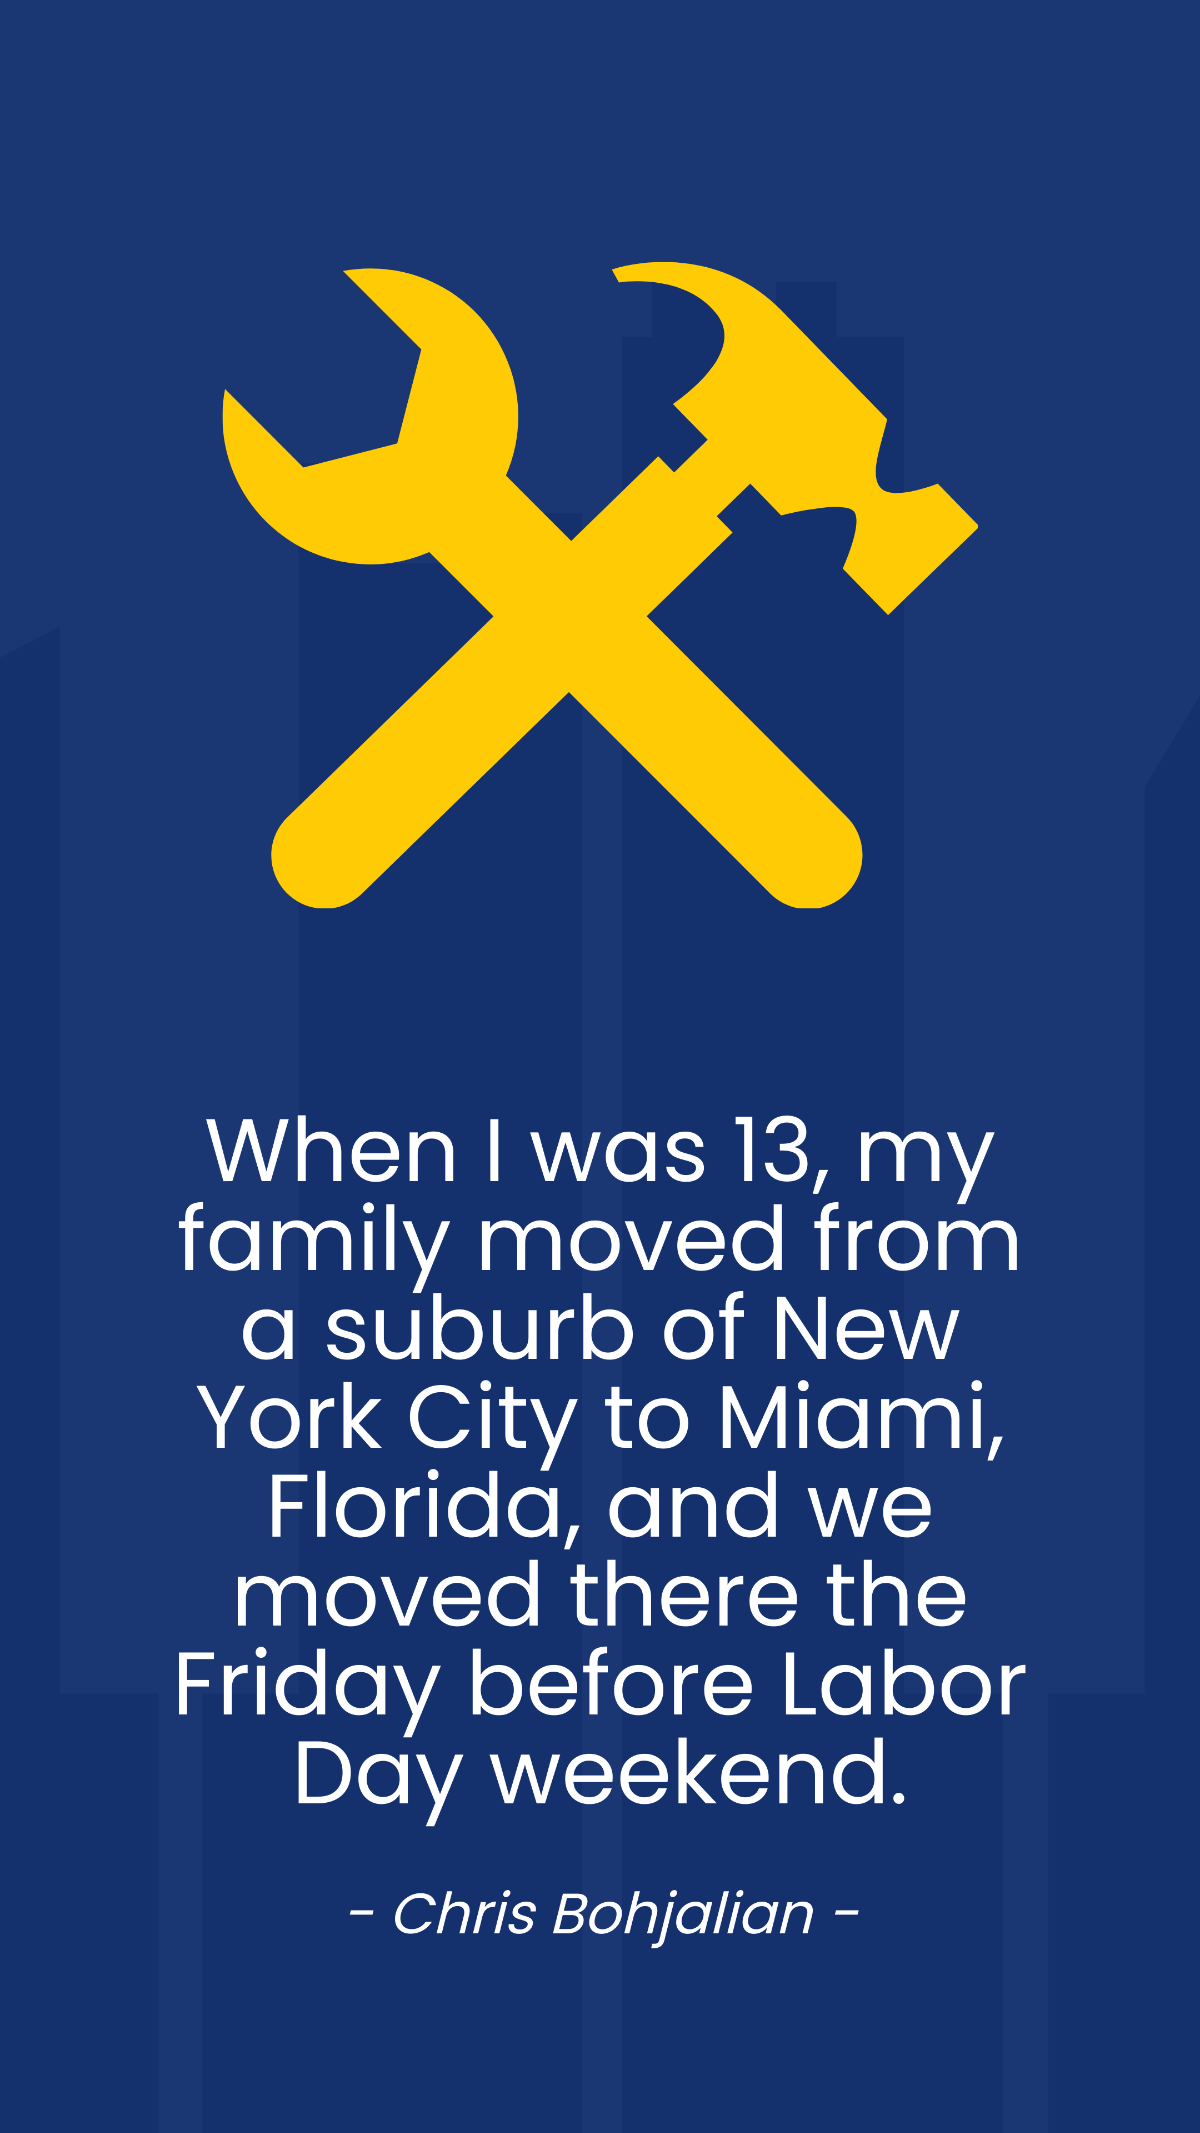 Free Chris Bohjalian - When I was 13, my family moved from a suburb of New York City to Miami, Florida, and we moved there the Friday before Labor Day weekend. Template